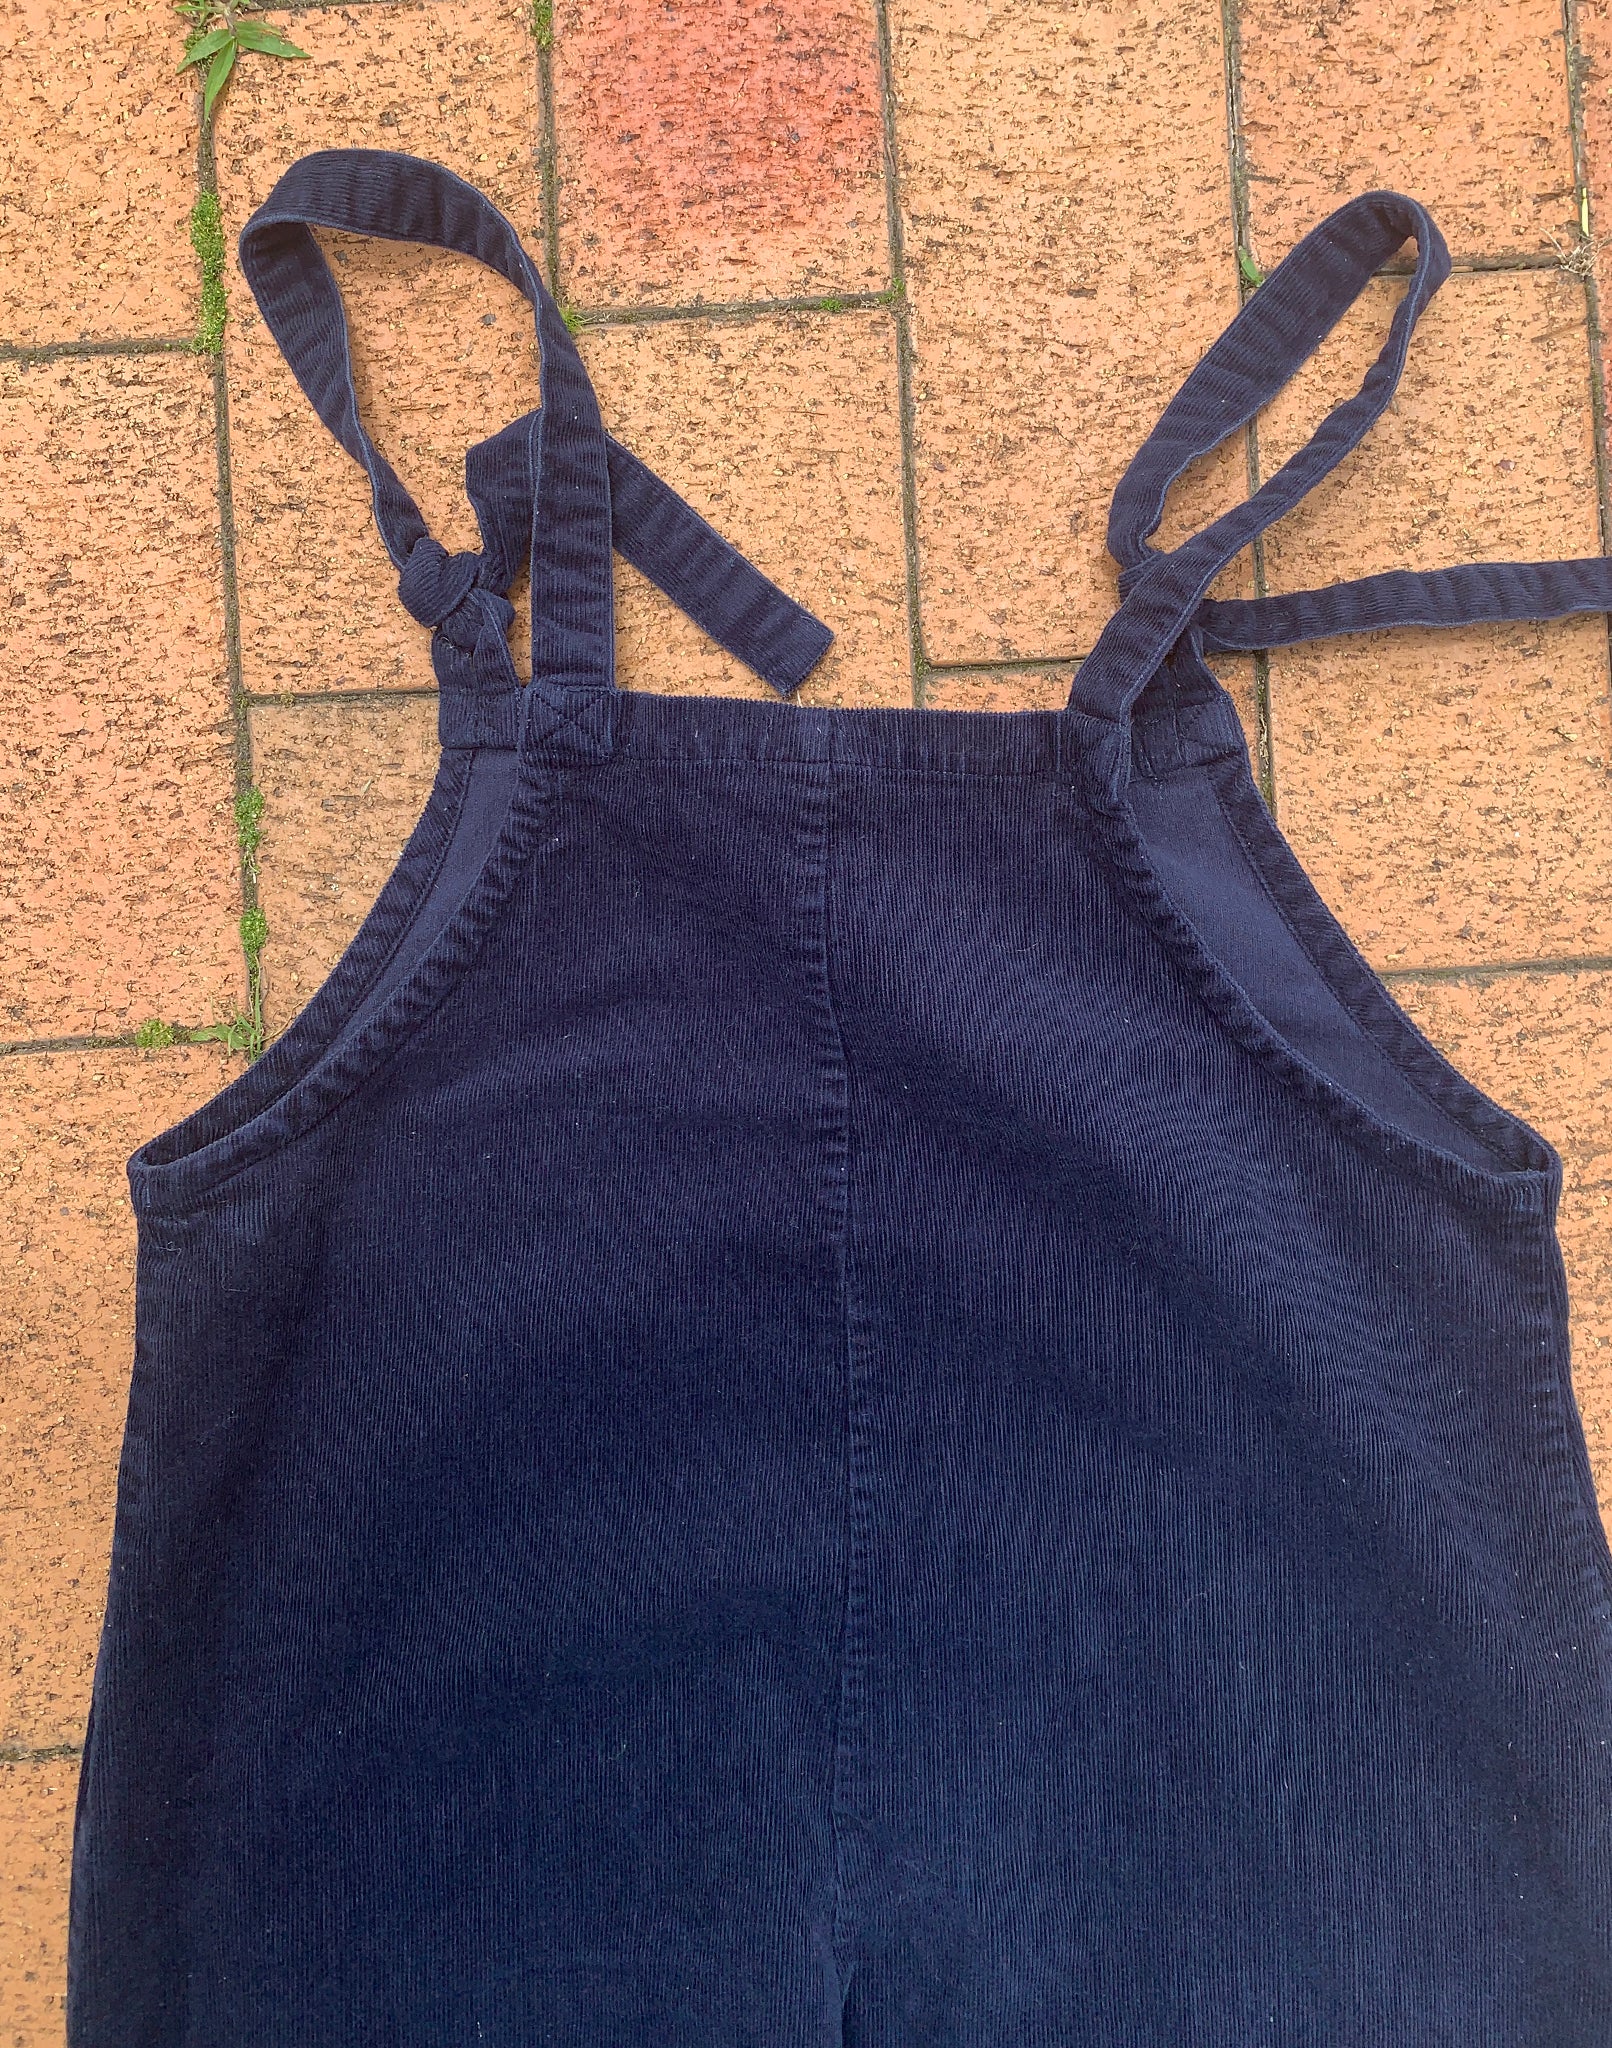 Lucy & Yak Navy Corduroy Cotton Dungarees - Size M